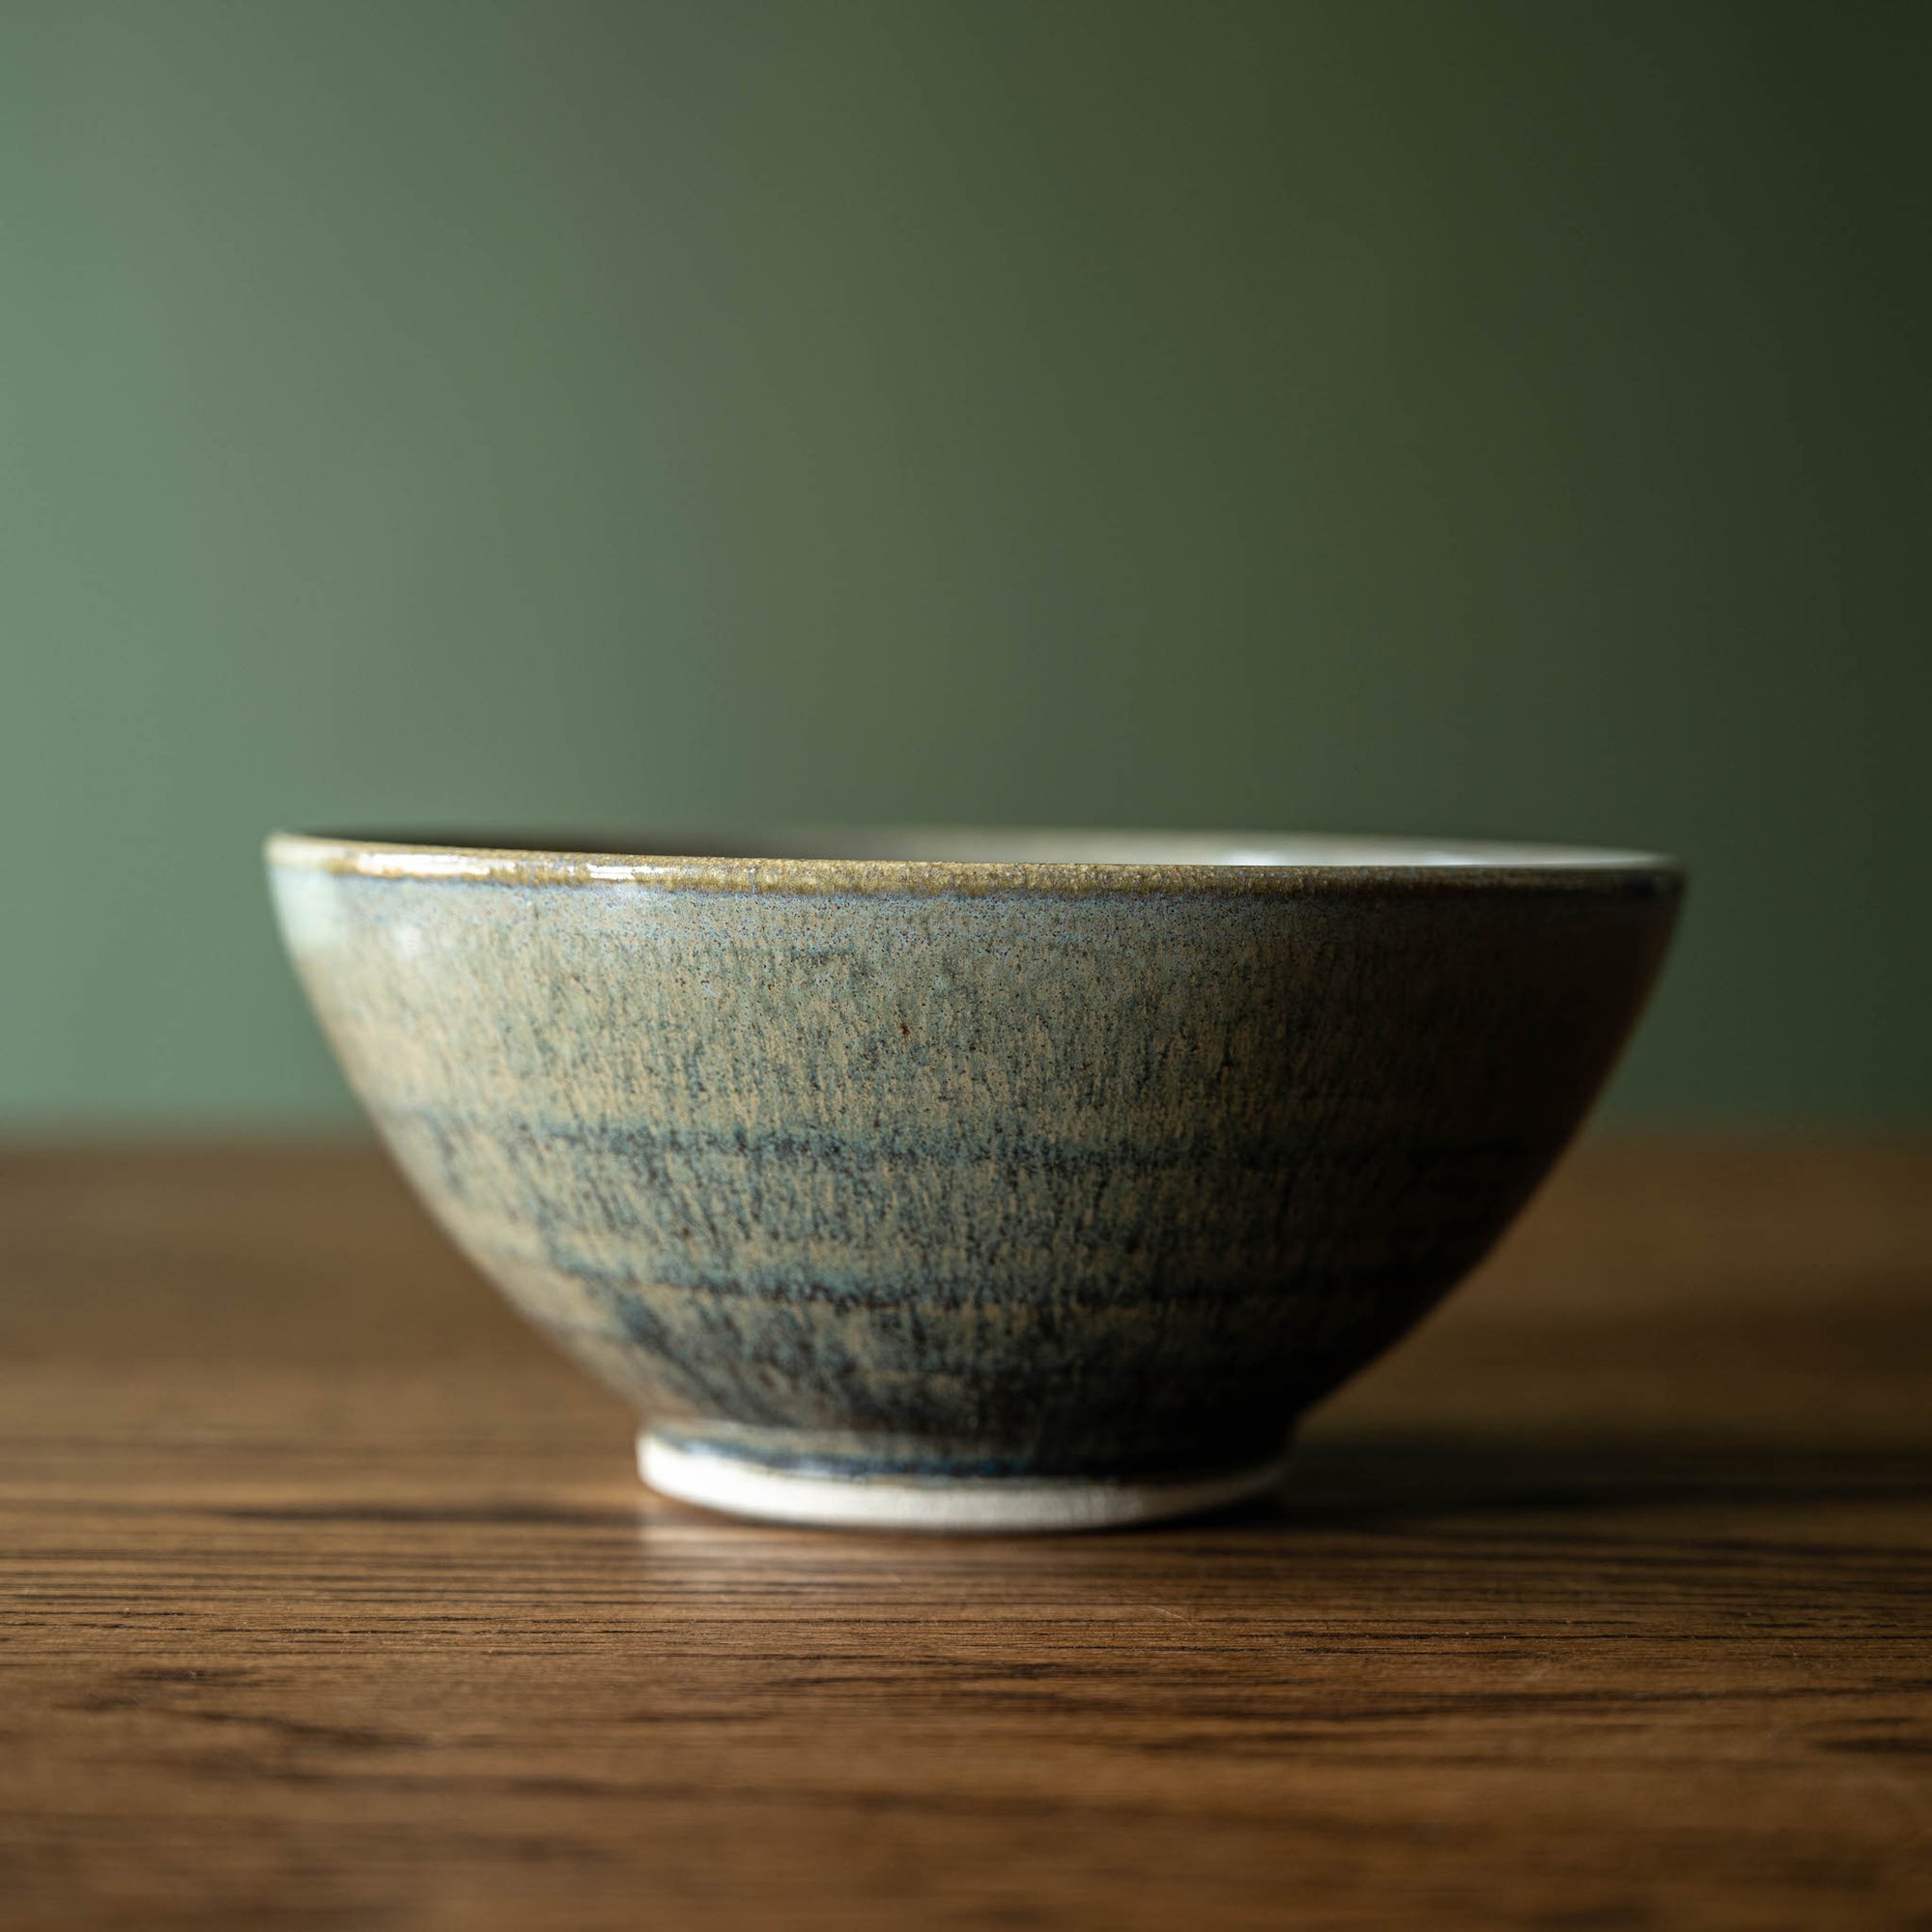 Pottery West Stoneware Cereal Bowl in Nori Glaze